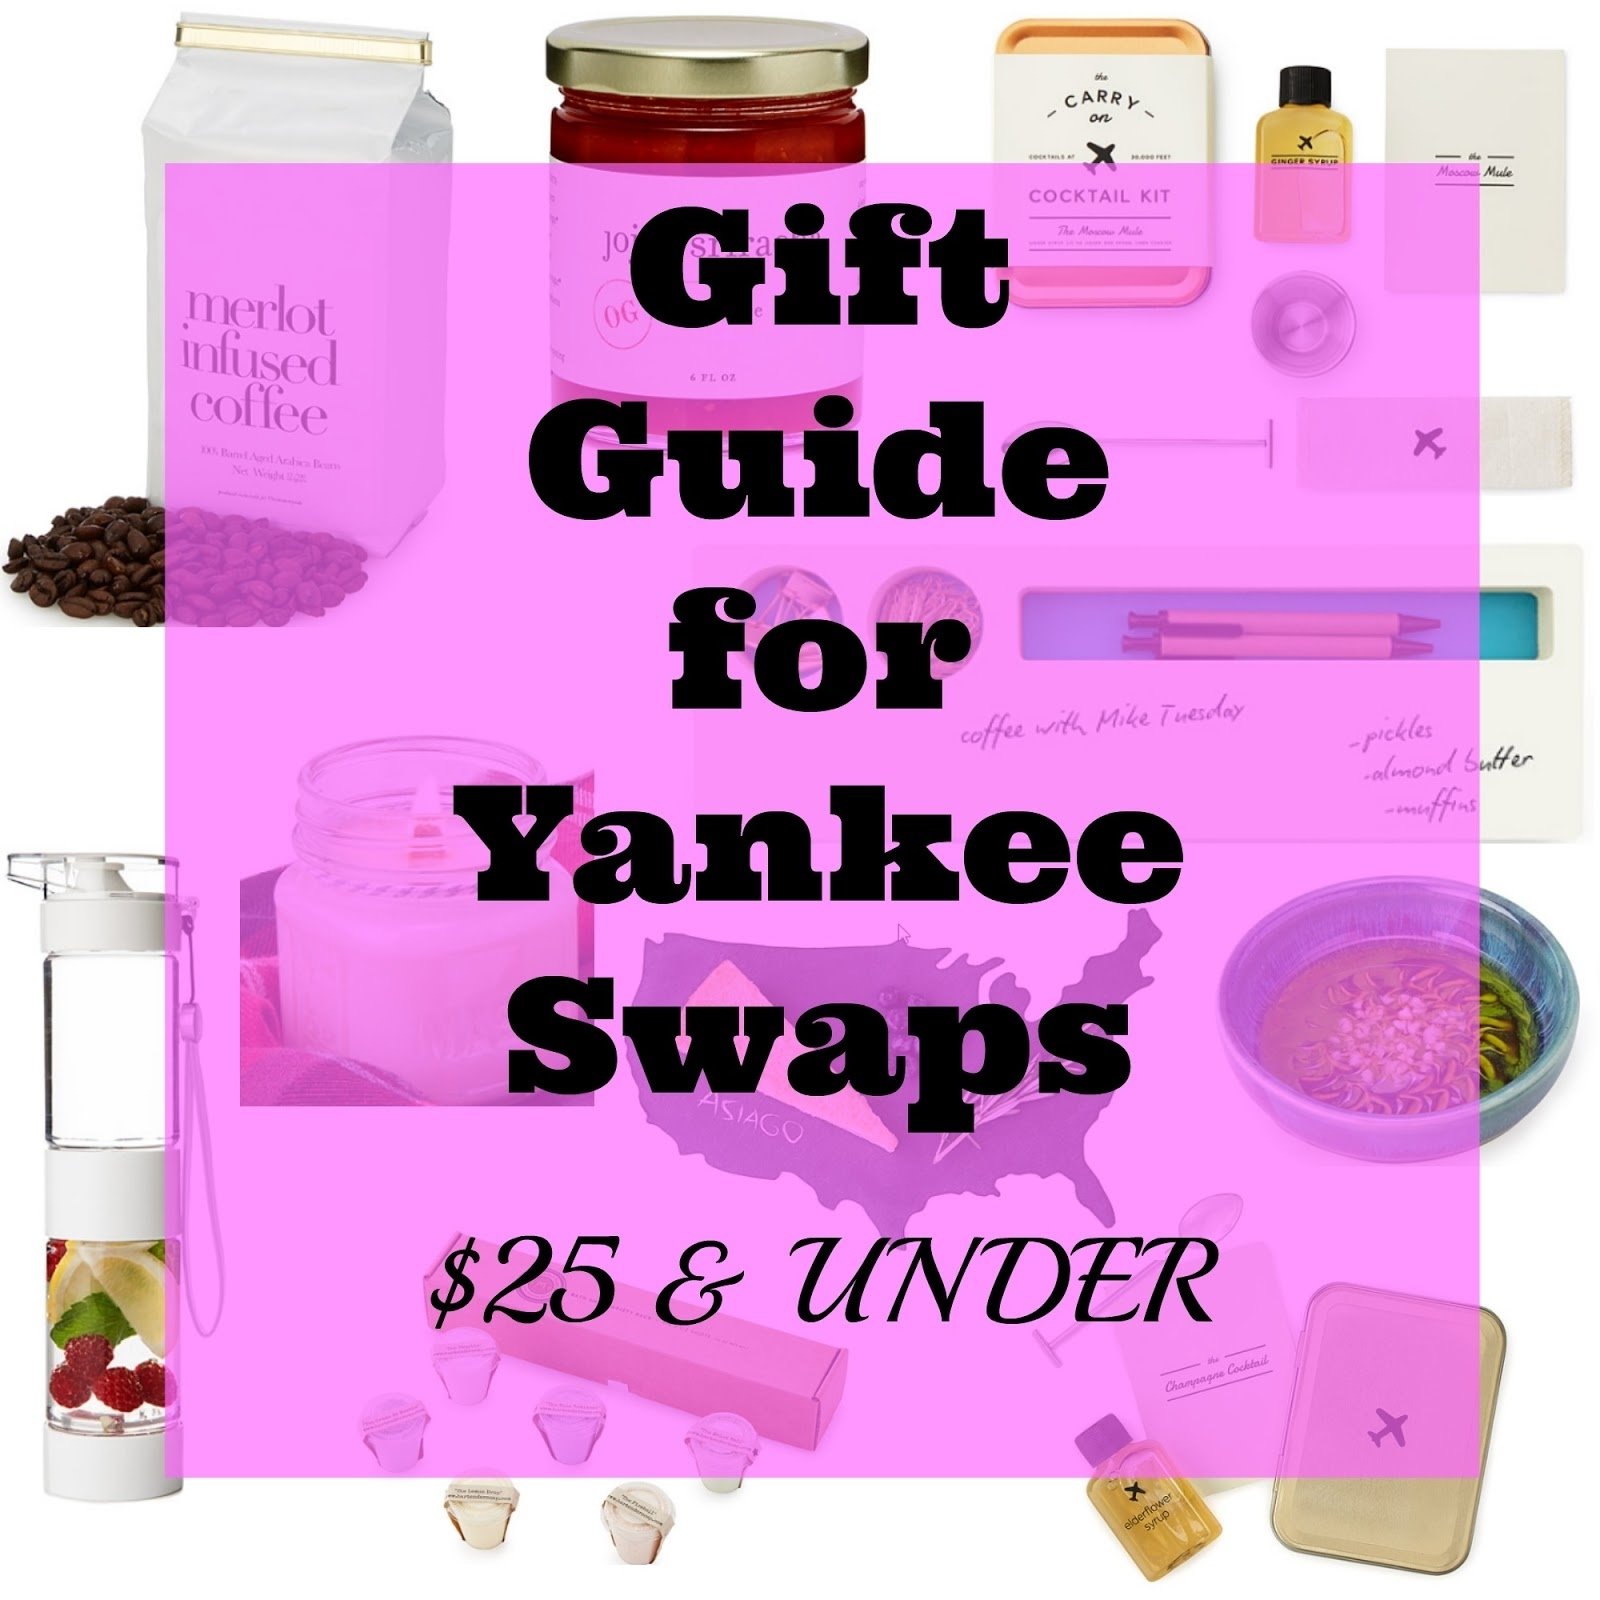 10 Lovely Best Yankee Swap Gift Ideas gift guide 25 and under friends co workers b loved boston 1 2022